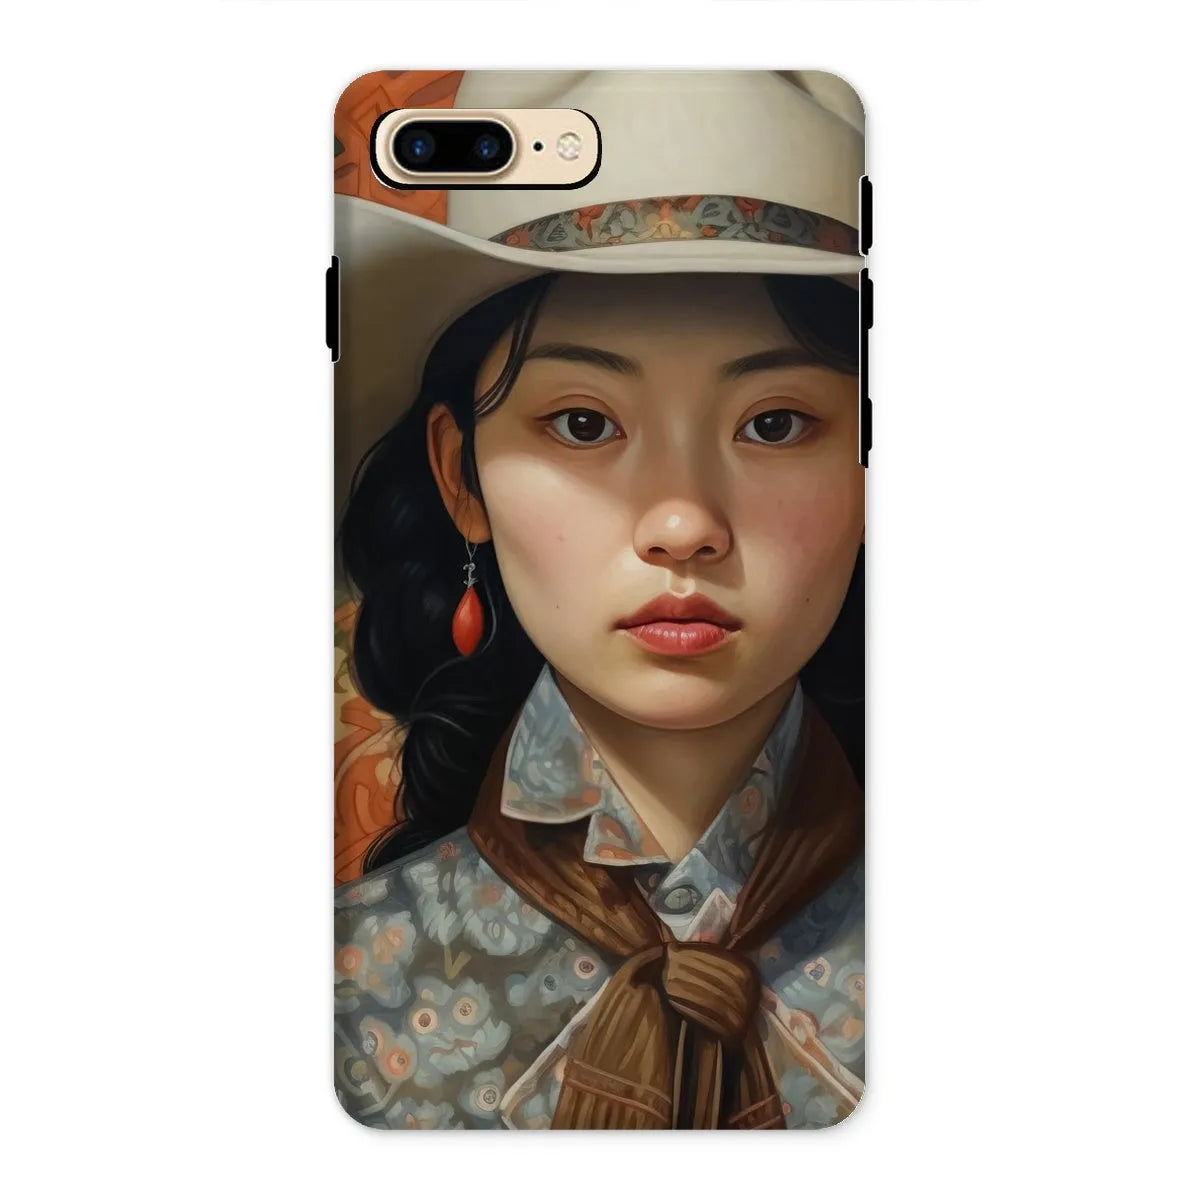 Zhi The Lesbian Cowgirl - Sapphic Art Phone Case - Iphone 8 Plus / Matte - Mobile Phone Cases - Aesthetic Art